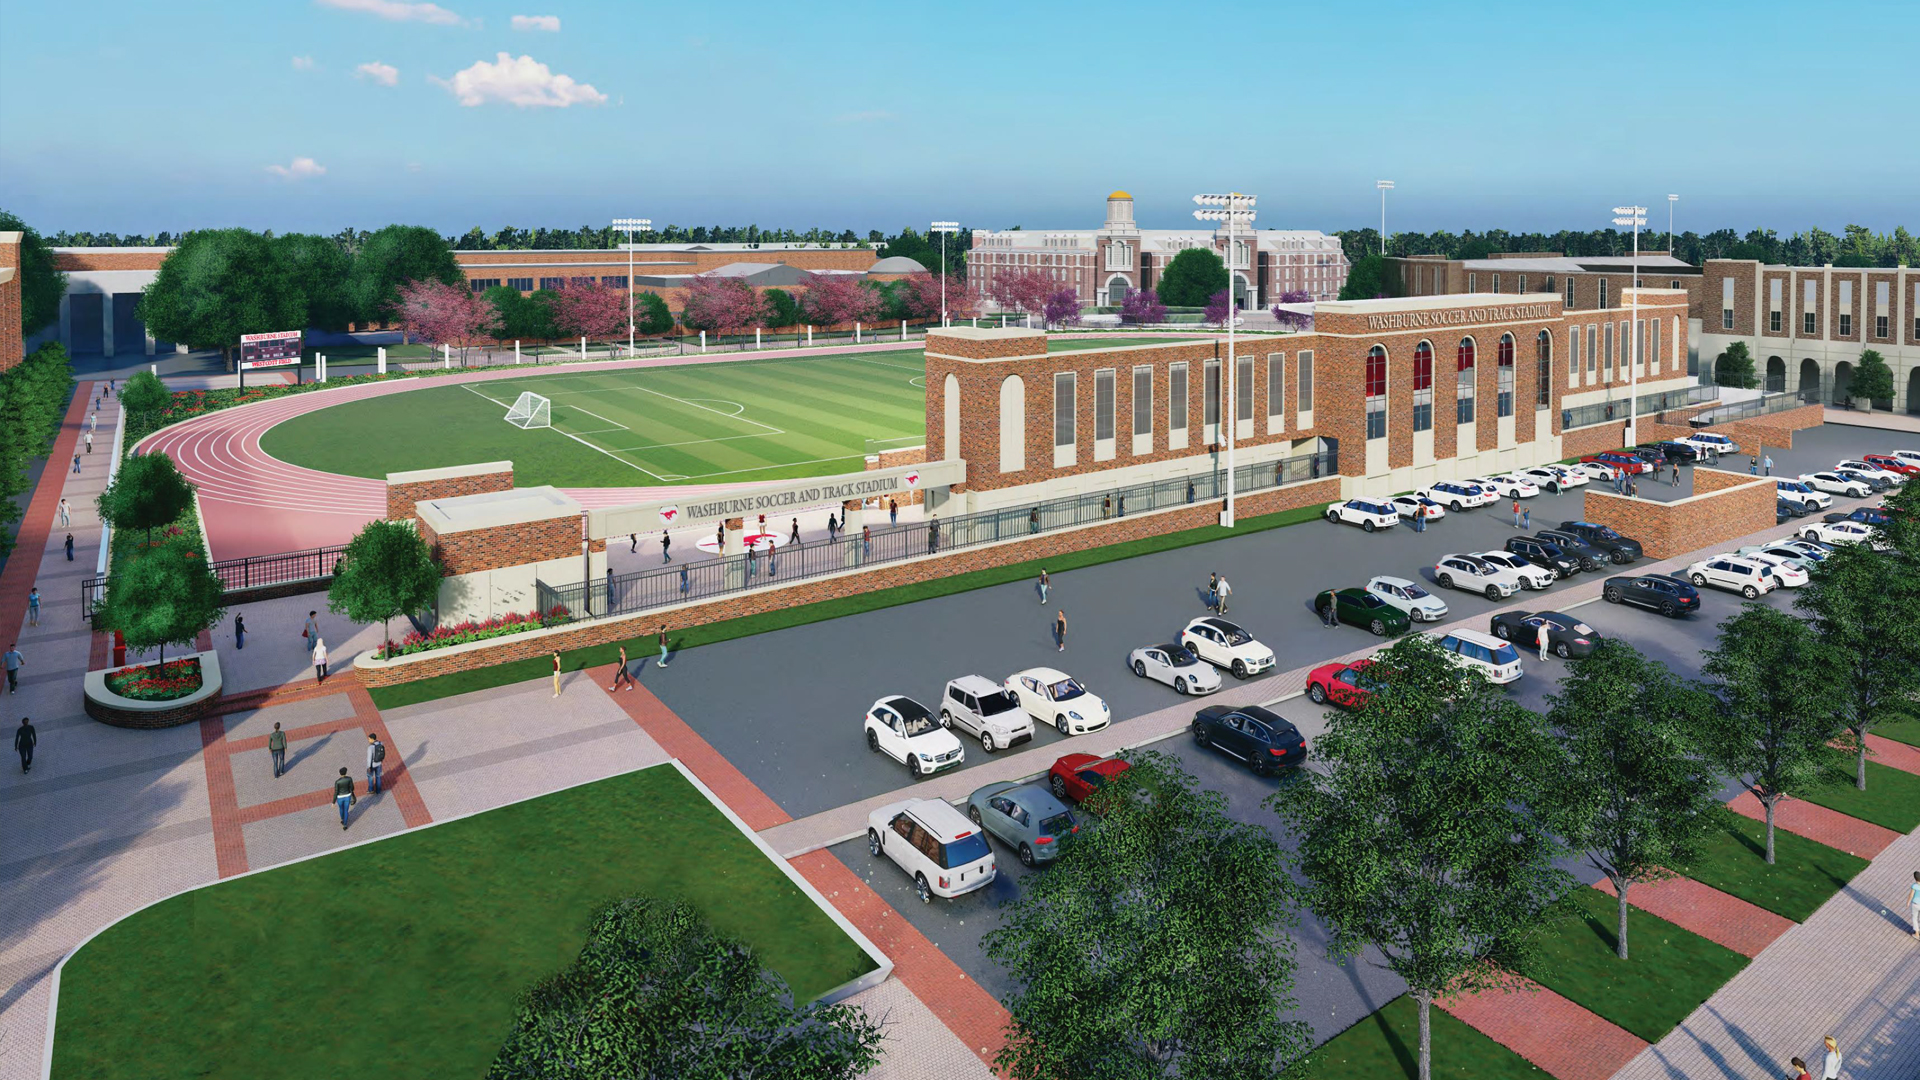 Southeast view of the Washburne Soccer and Track Stadium